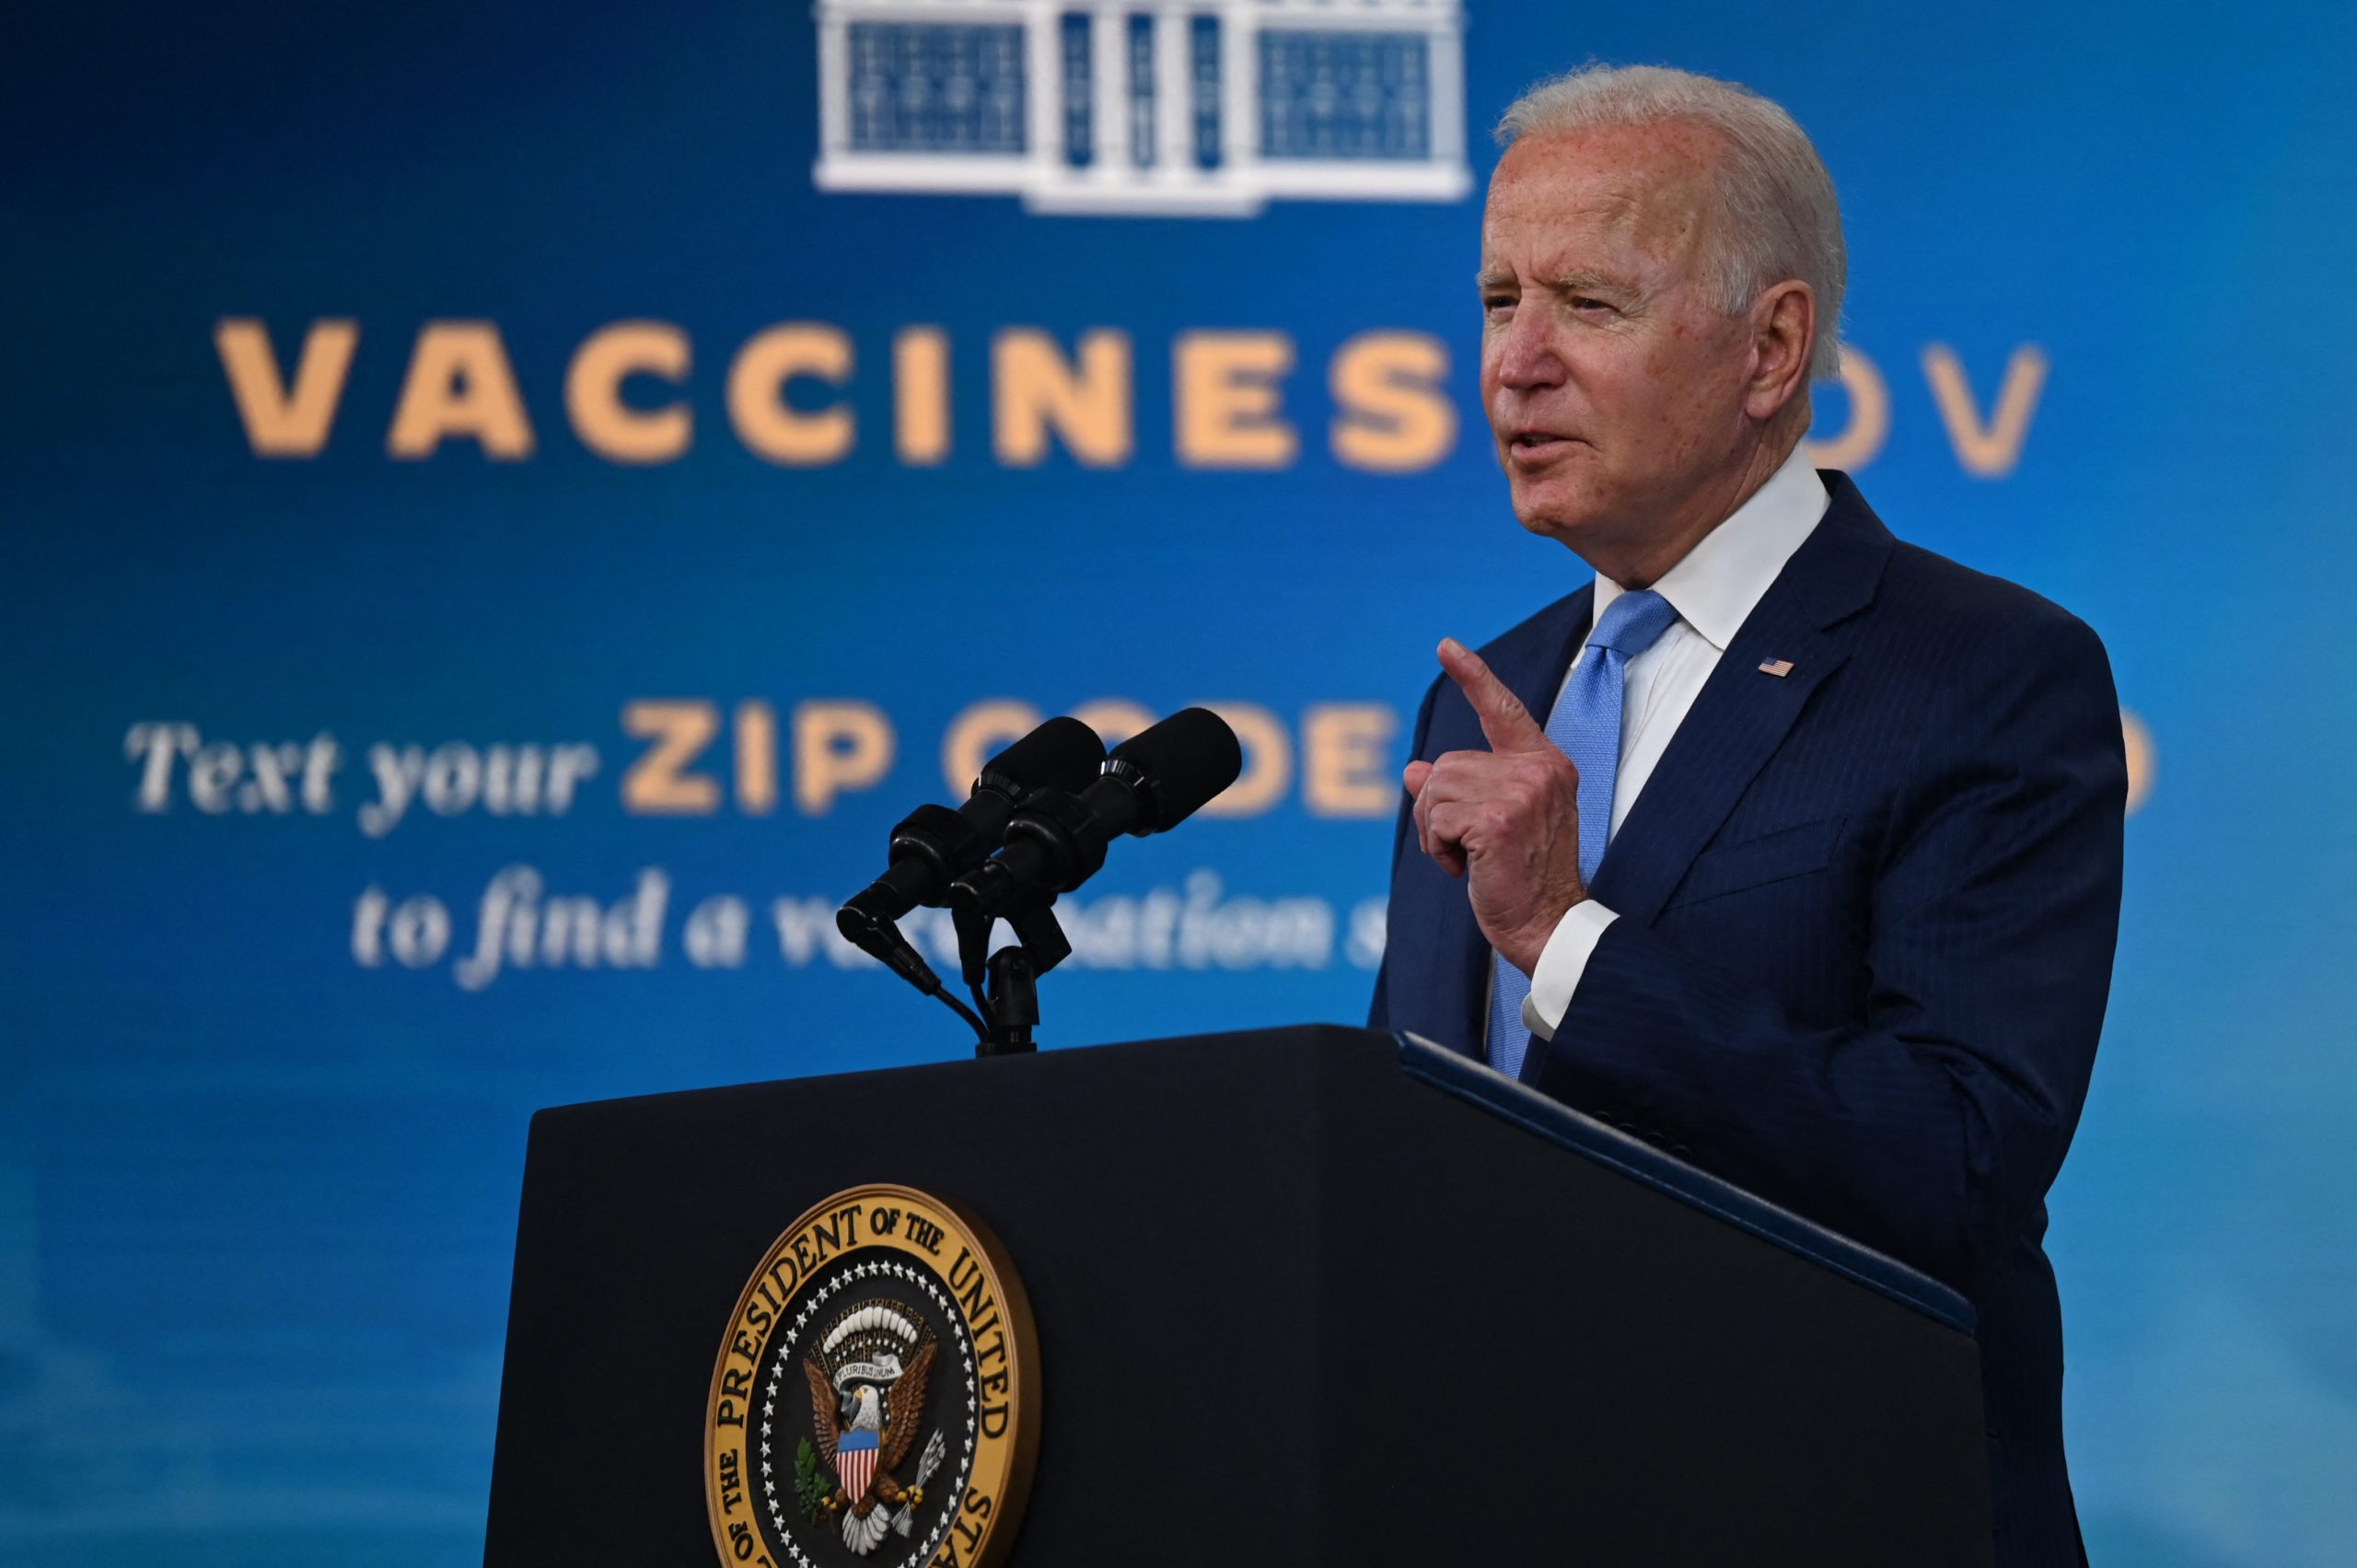 US President Joe Biden delivers remarks on the Covid-19 response and the vaccination program at the White House on August 23, 2021 in Washington,DC. - The US Food and Drug Administration on Monday fully approved the Pfizer-BioNTech Covid vaccine, a move that triggered a new wave of vaccine mandates as the Delta variant batters the country.Around 52 percent of the American population is fully vaccinated, but health authorities have hit a wall of vaccine hesitant people, impeding the national campaign. (Photo by Jim WATSON / AFP) (Photo by JIM WATSON/AFP via Getty Images)